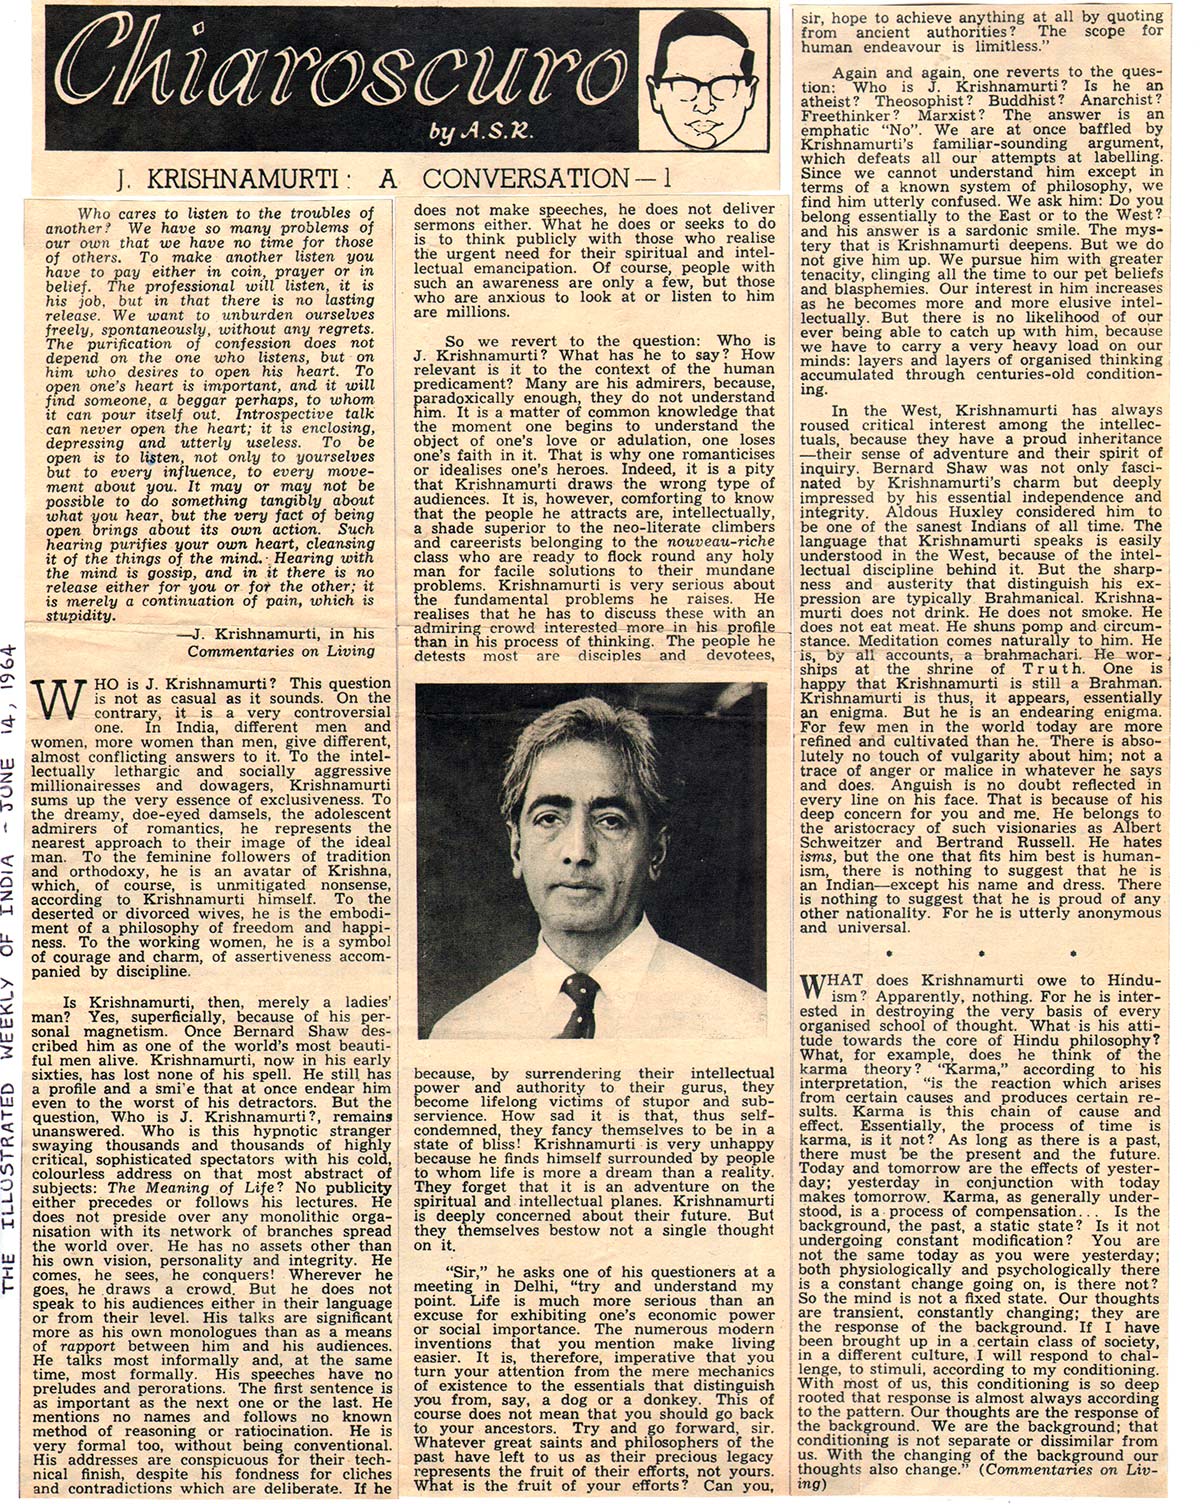 1964 The Illustrated Weekly of India - J Krishnamurti, A Conversation